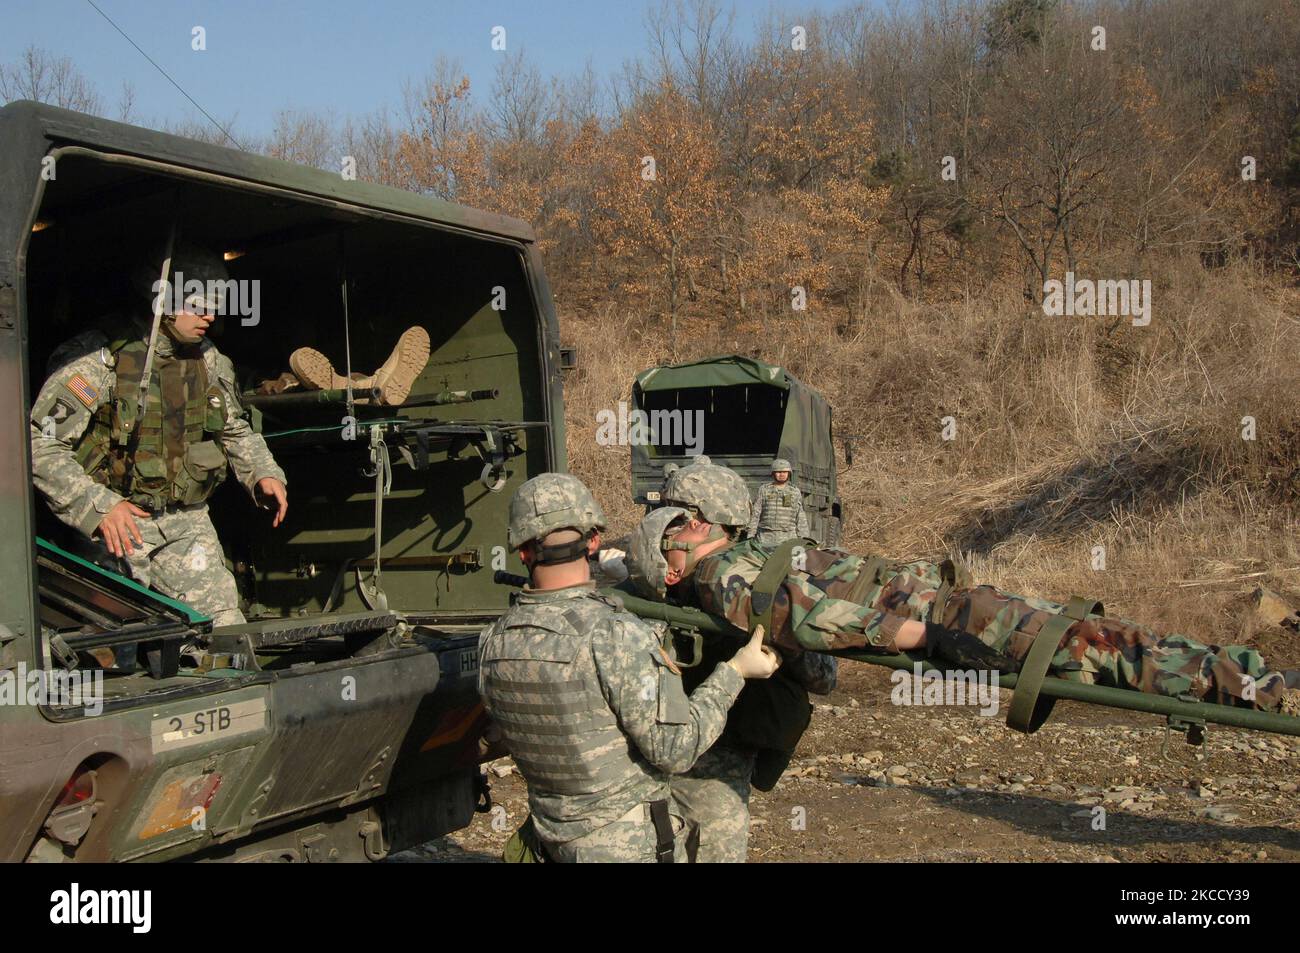 U.S. Army combat medics load a simulated injured soldier into an ambulance. Stock Photo